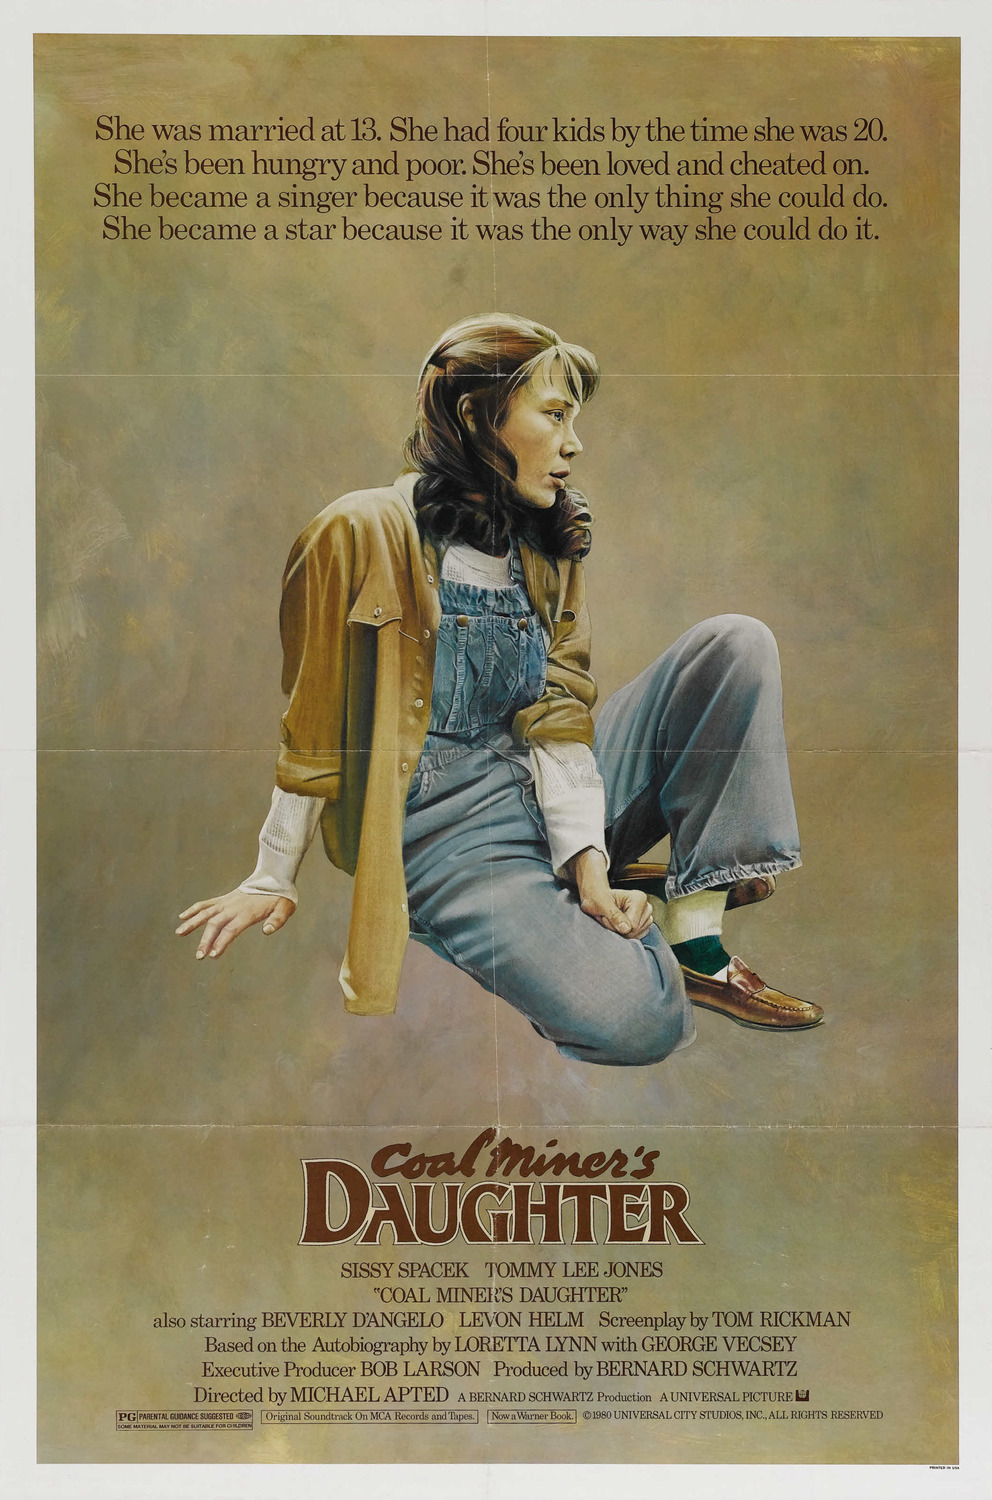 Coal Miner's Daughter: Extra Large Movie Poster Image - Internet Movie